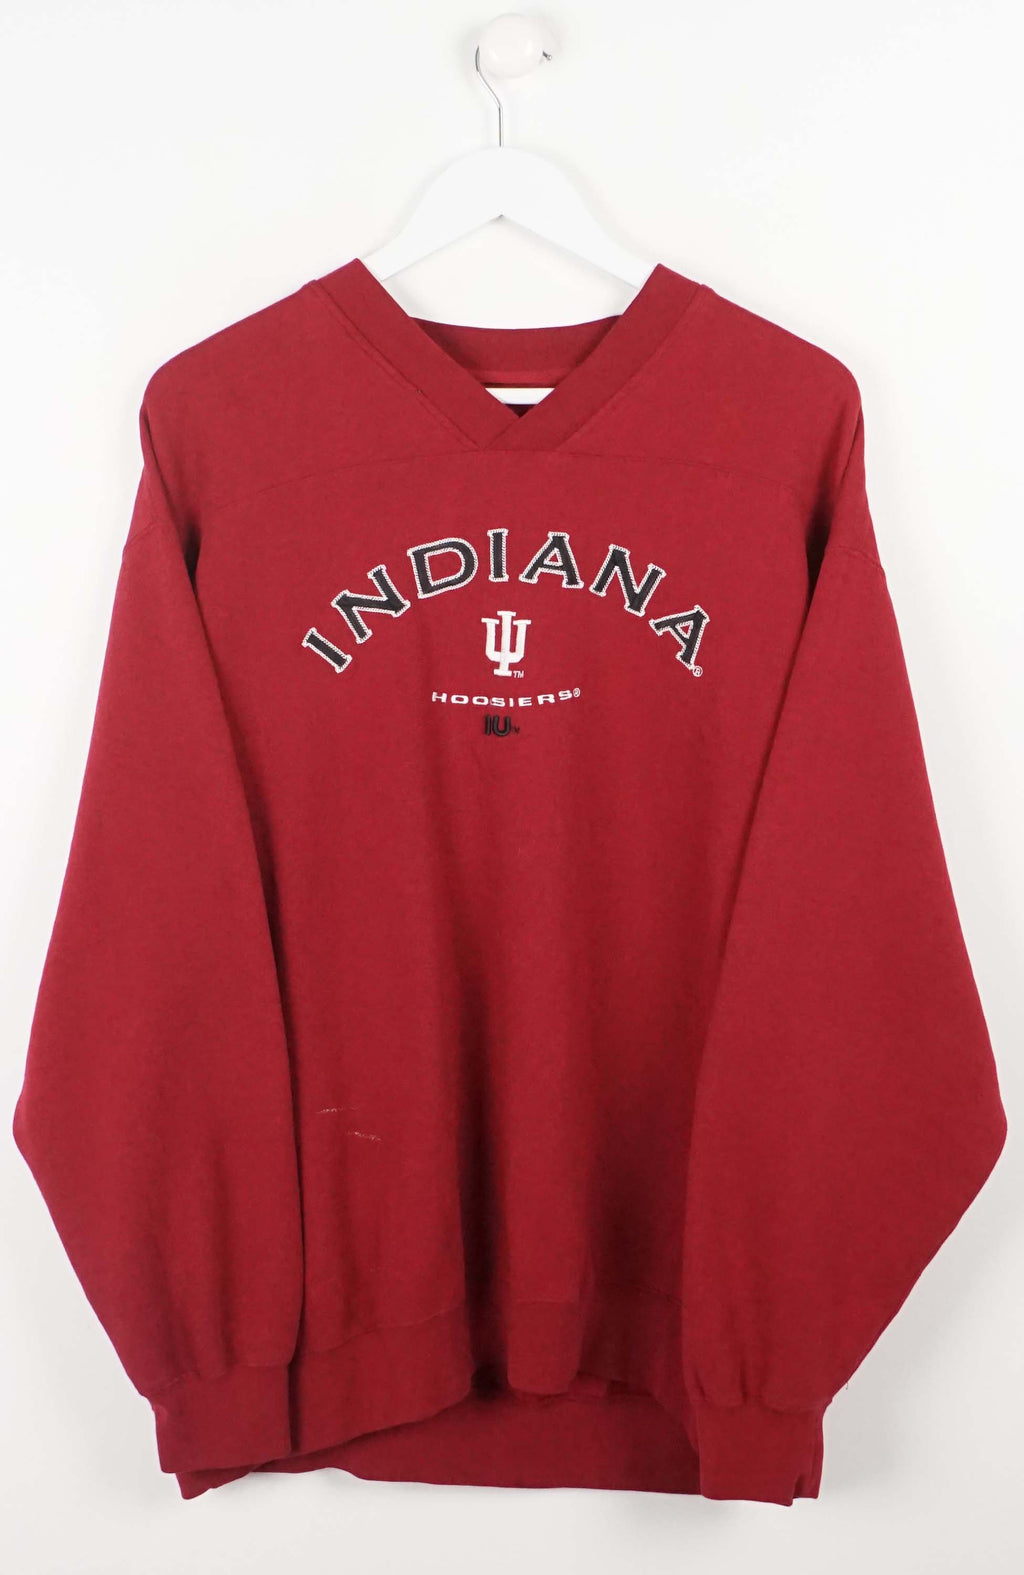 VINTAGE INDIANA SWEATER (XL)